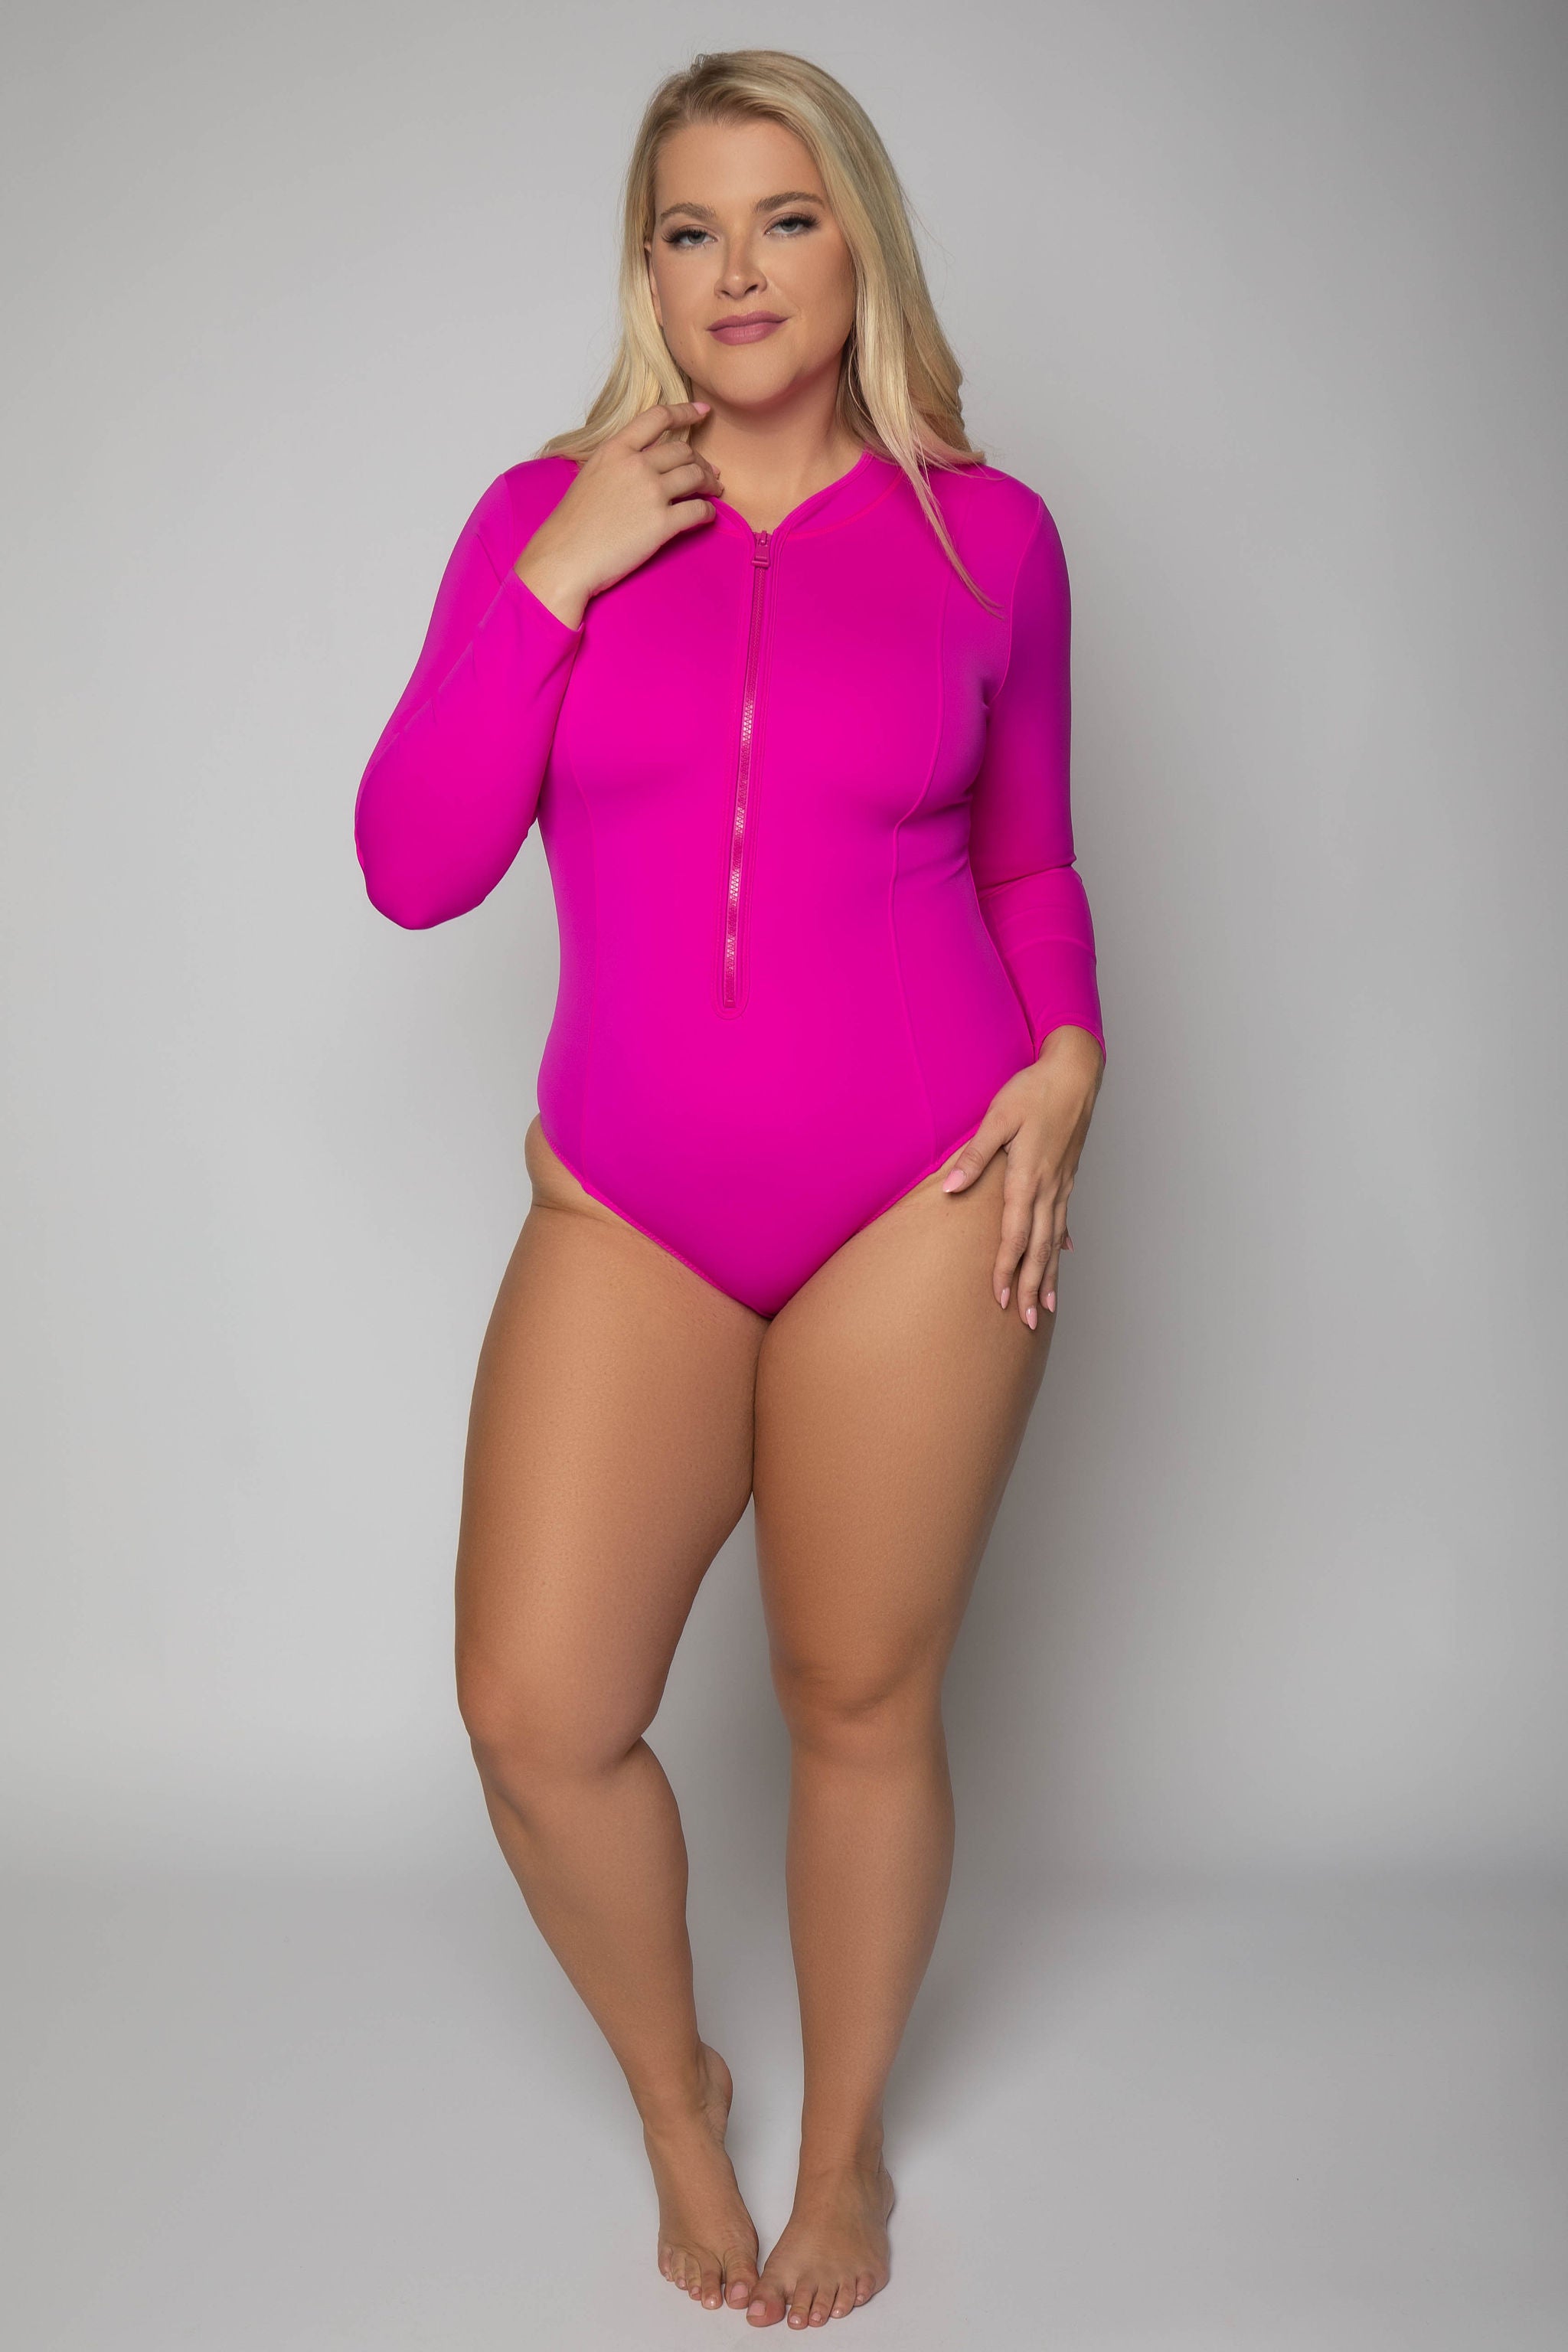 COMPRESSION LONG SLEEVE SWIMSUIT - AMOUR781